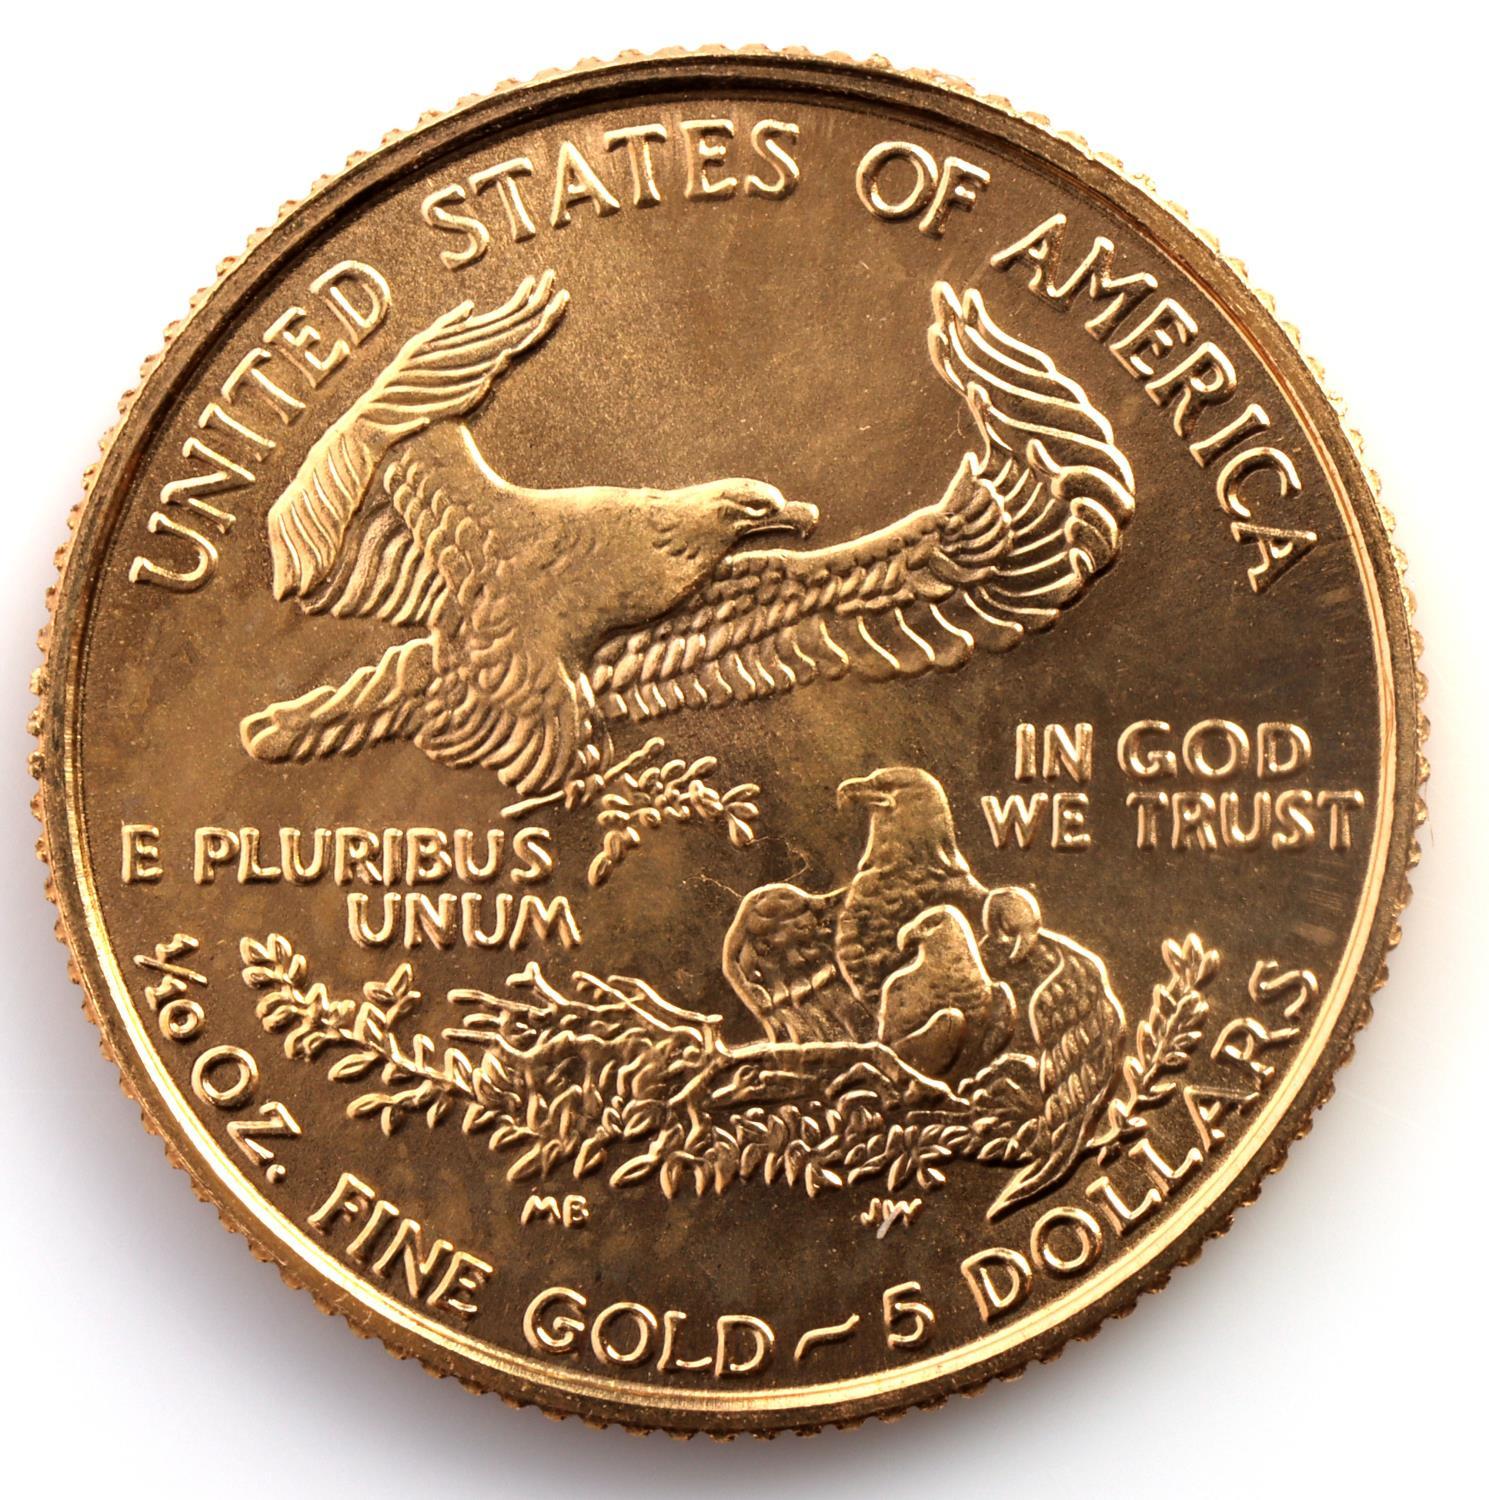 1/10TH AMERICAN GOLD EAGLE GOLD COIN